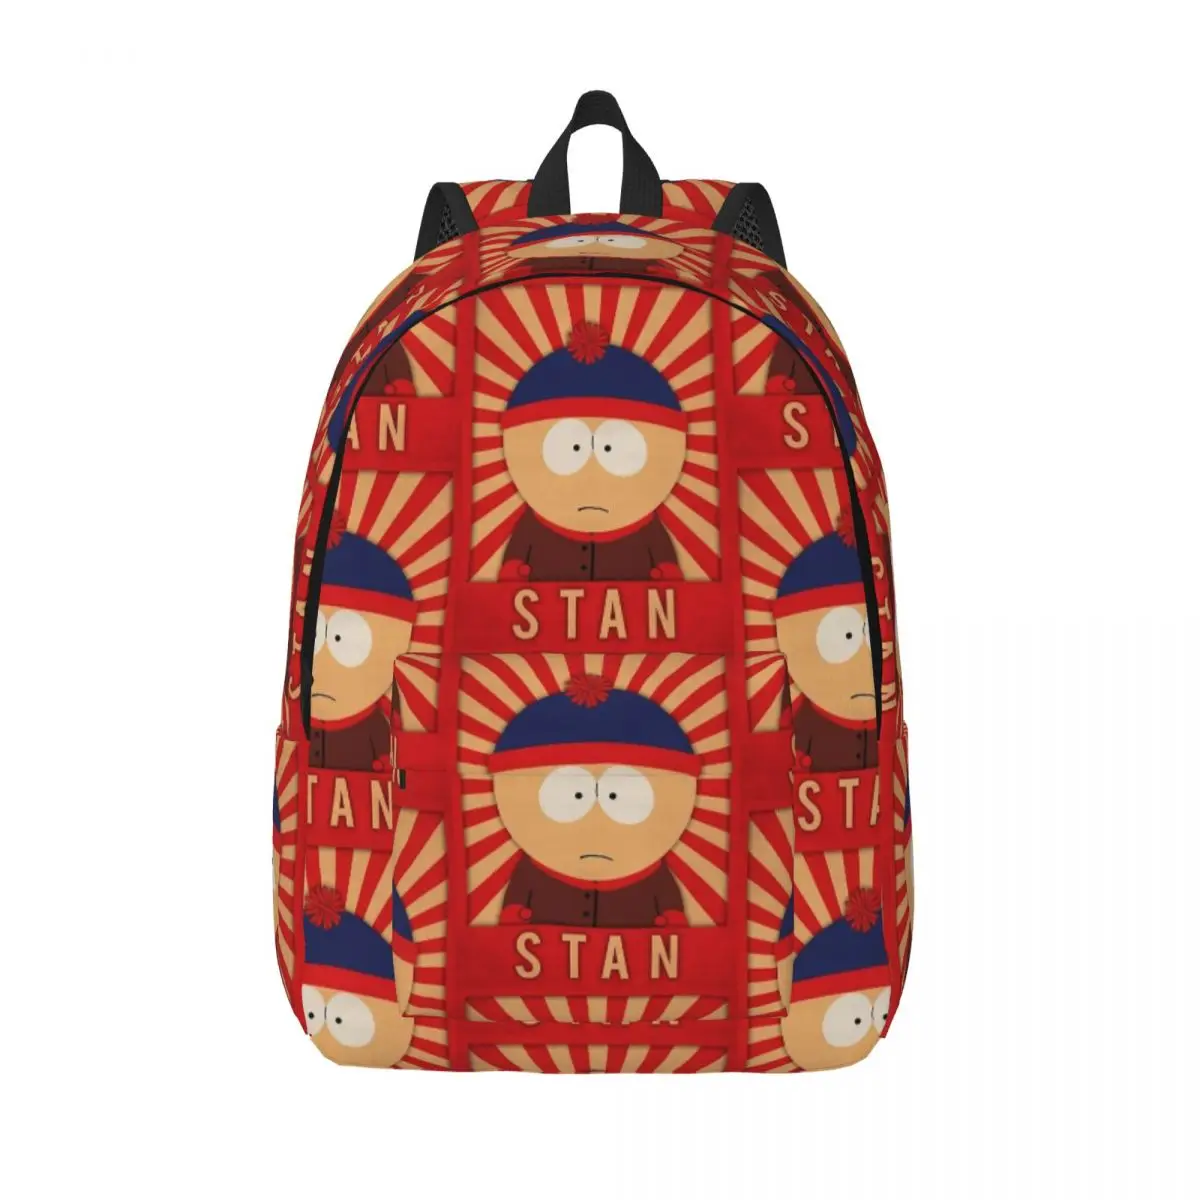 

South-Park Stan Fashion Backpack Durable High School Hiking Travel Cartoon Daypack for Men Women Laptop Canvas Bags